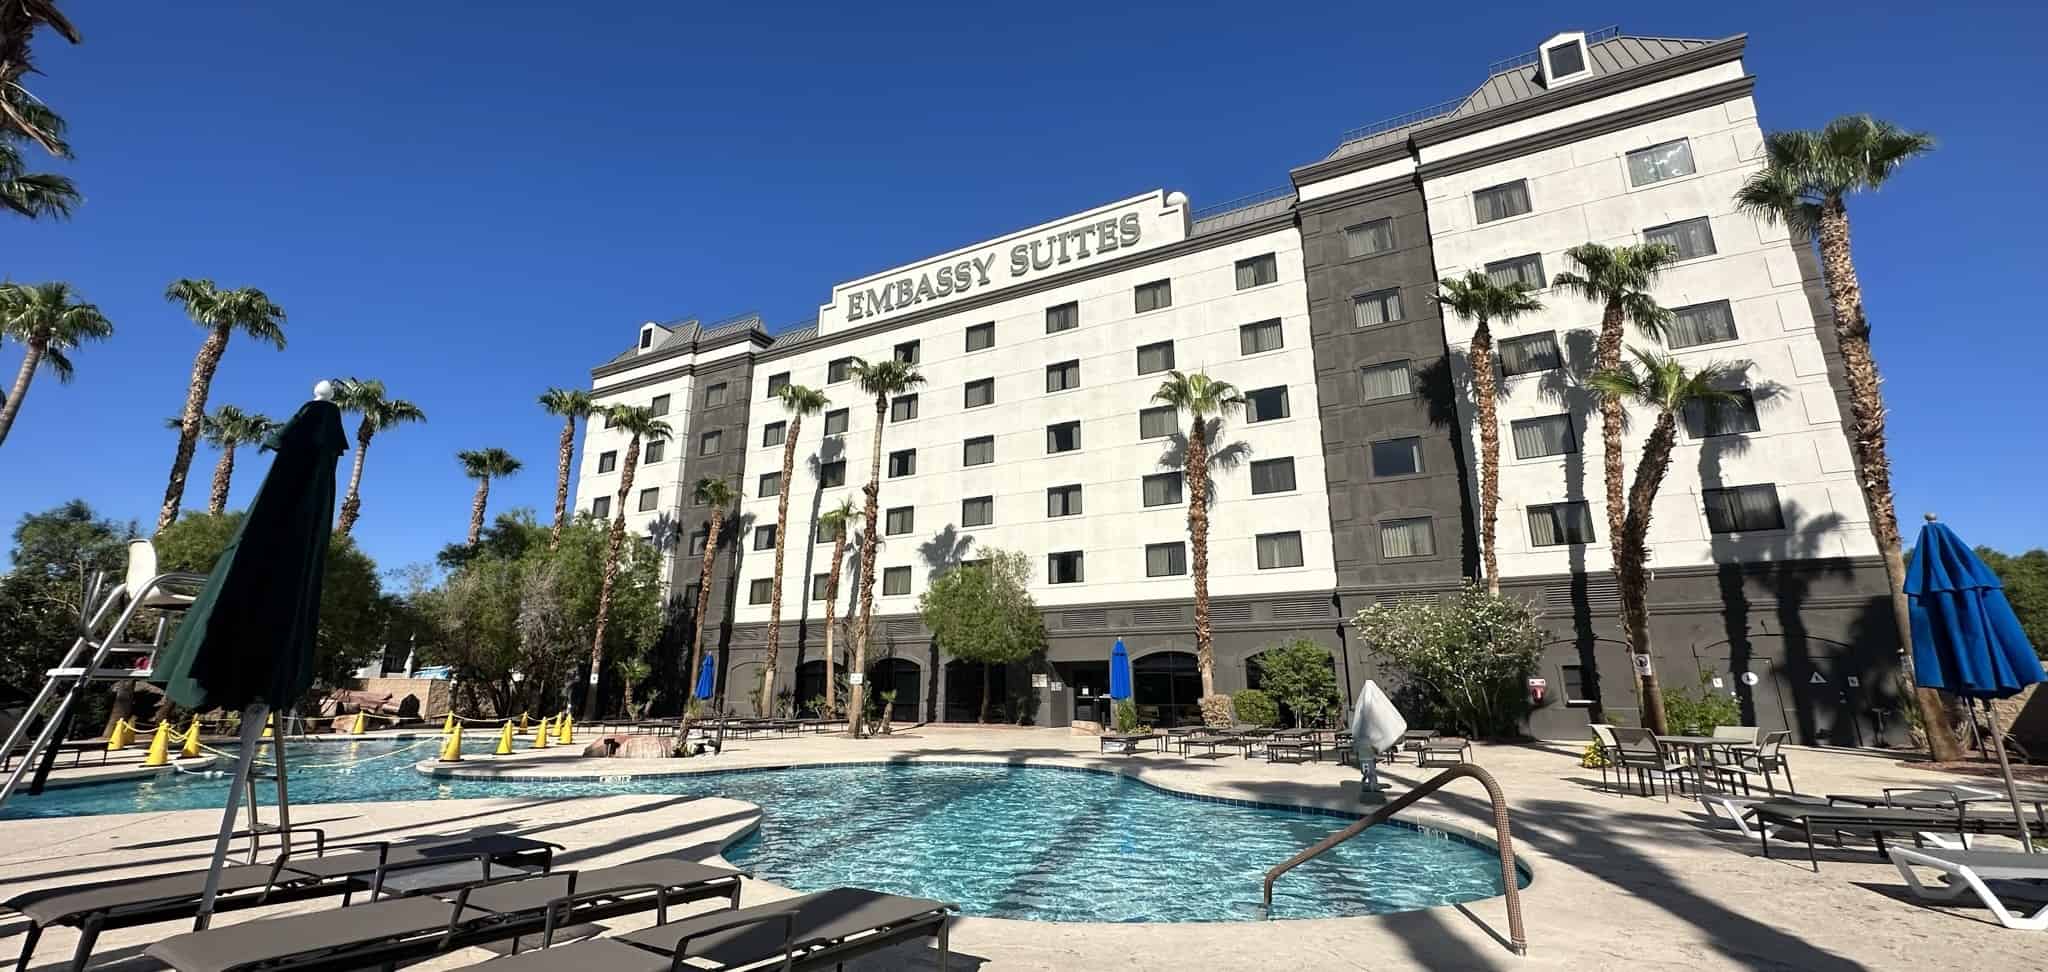 You are currently viewing Embassy Suites  by Hilton Near UNLV Pool: 2023 Update